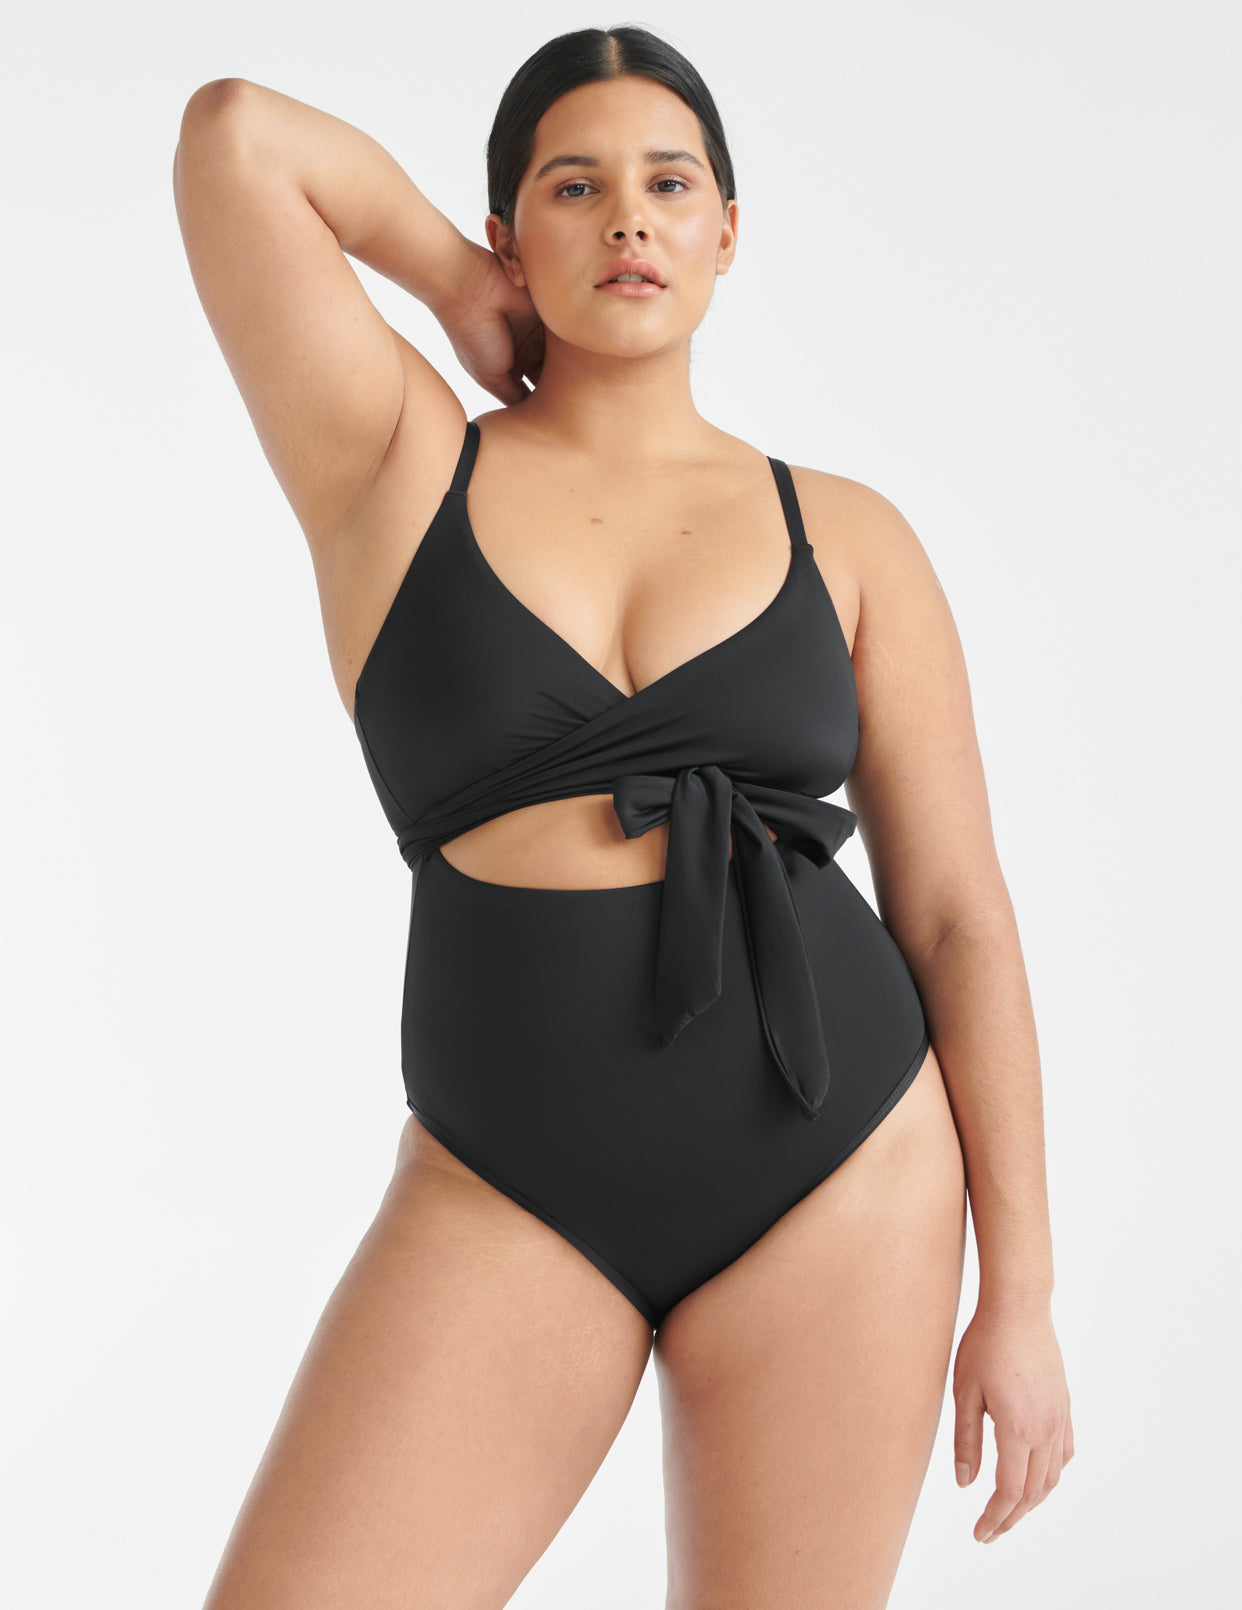 Christina  @knix didn't miss with this one! Oooof this Swimwear